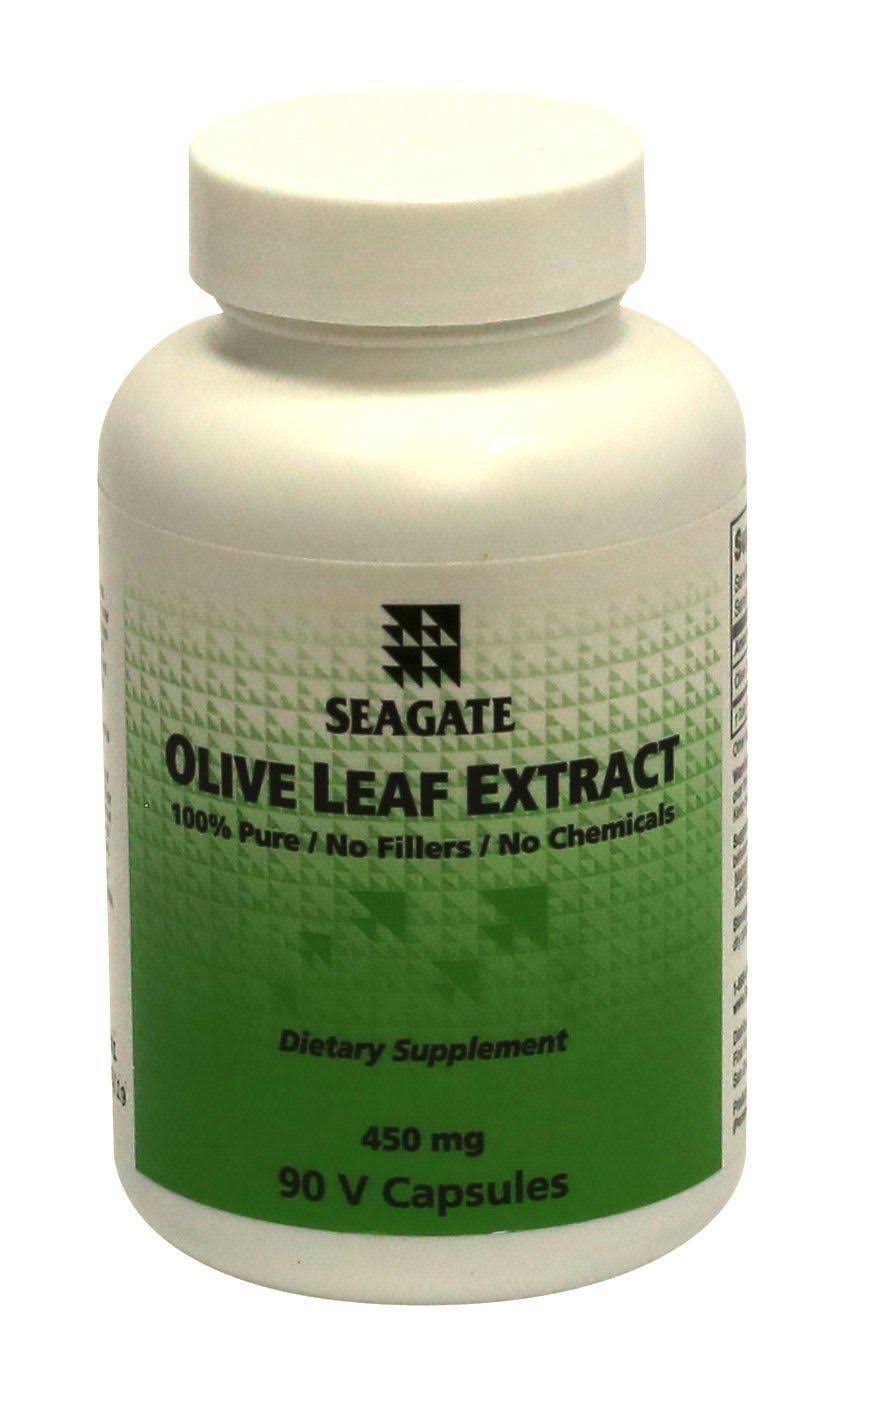 Seagate Olive Leaf Extract Dietary Supplement - 450Mg, 90 Capsules